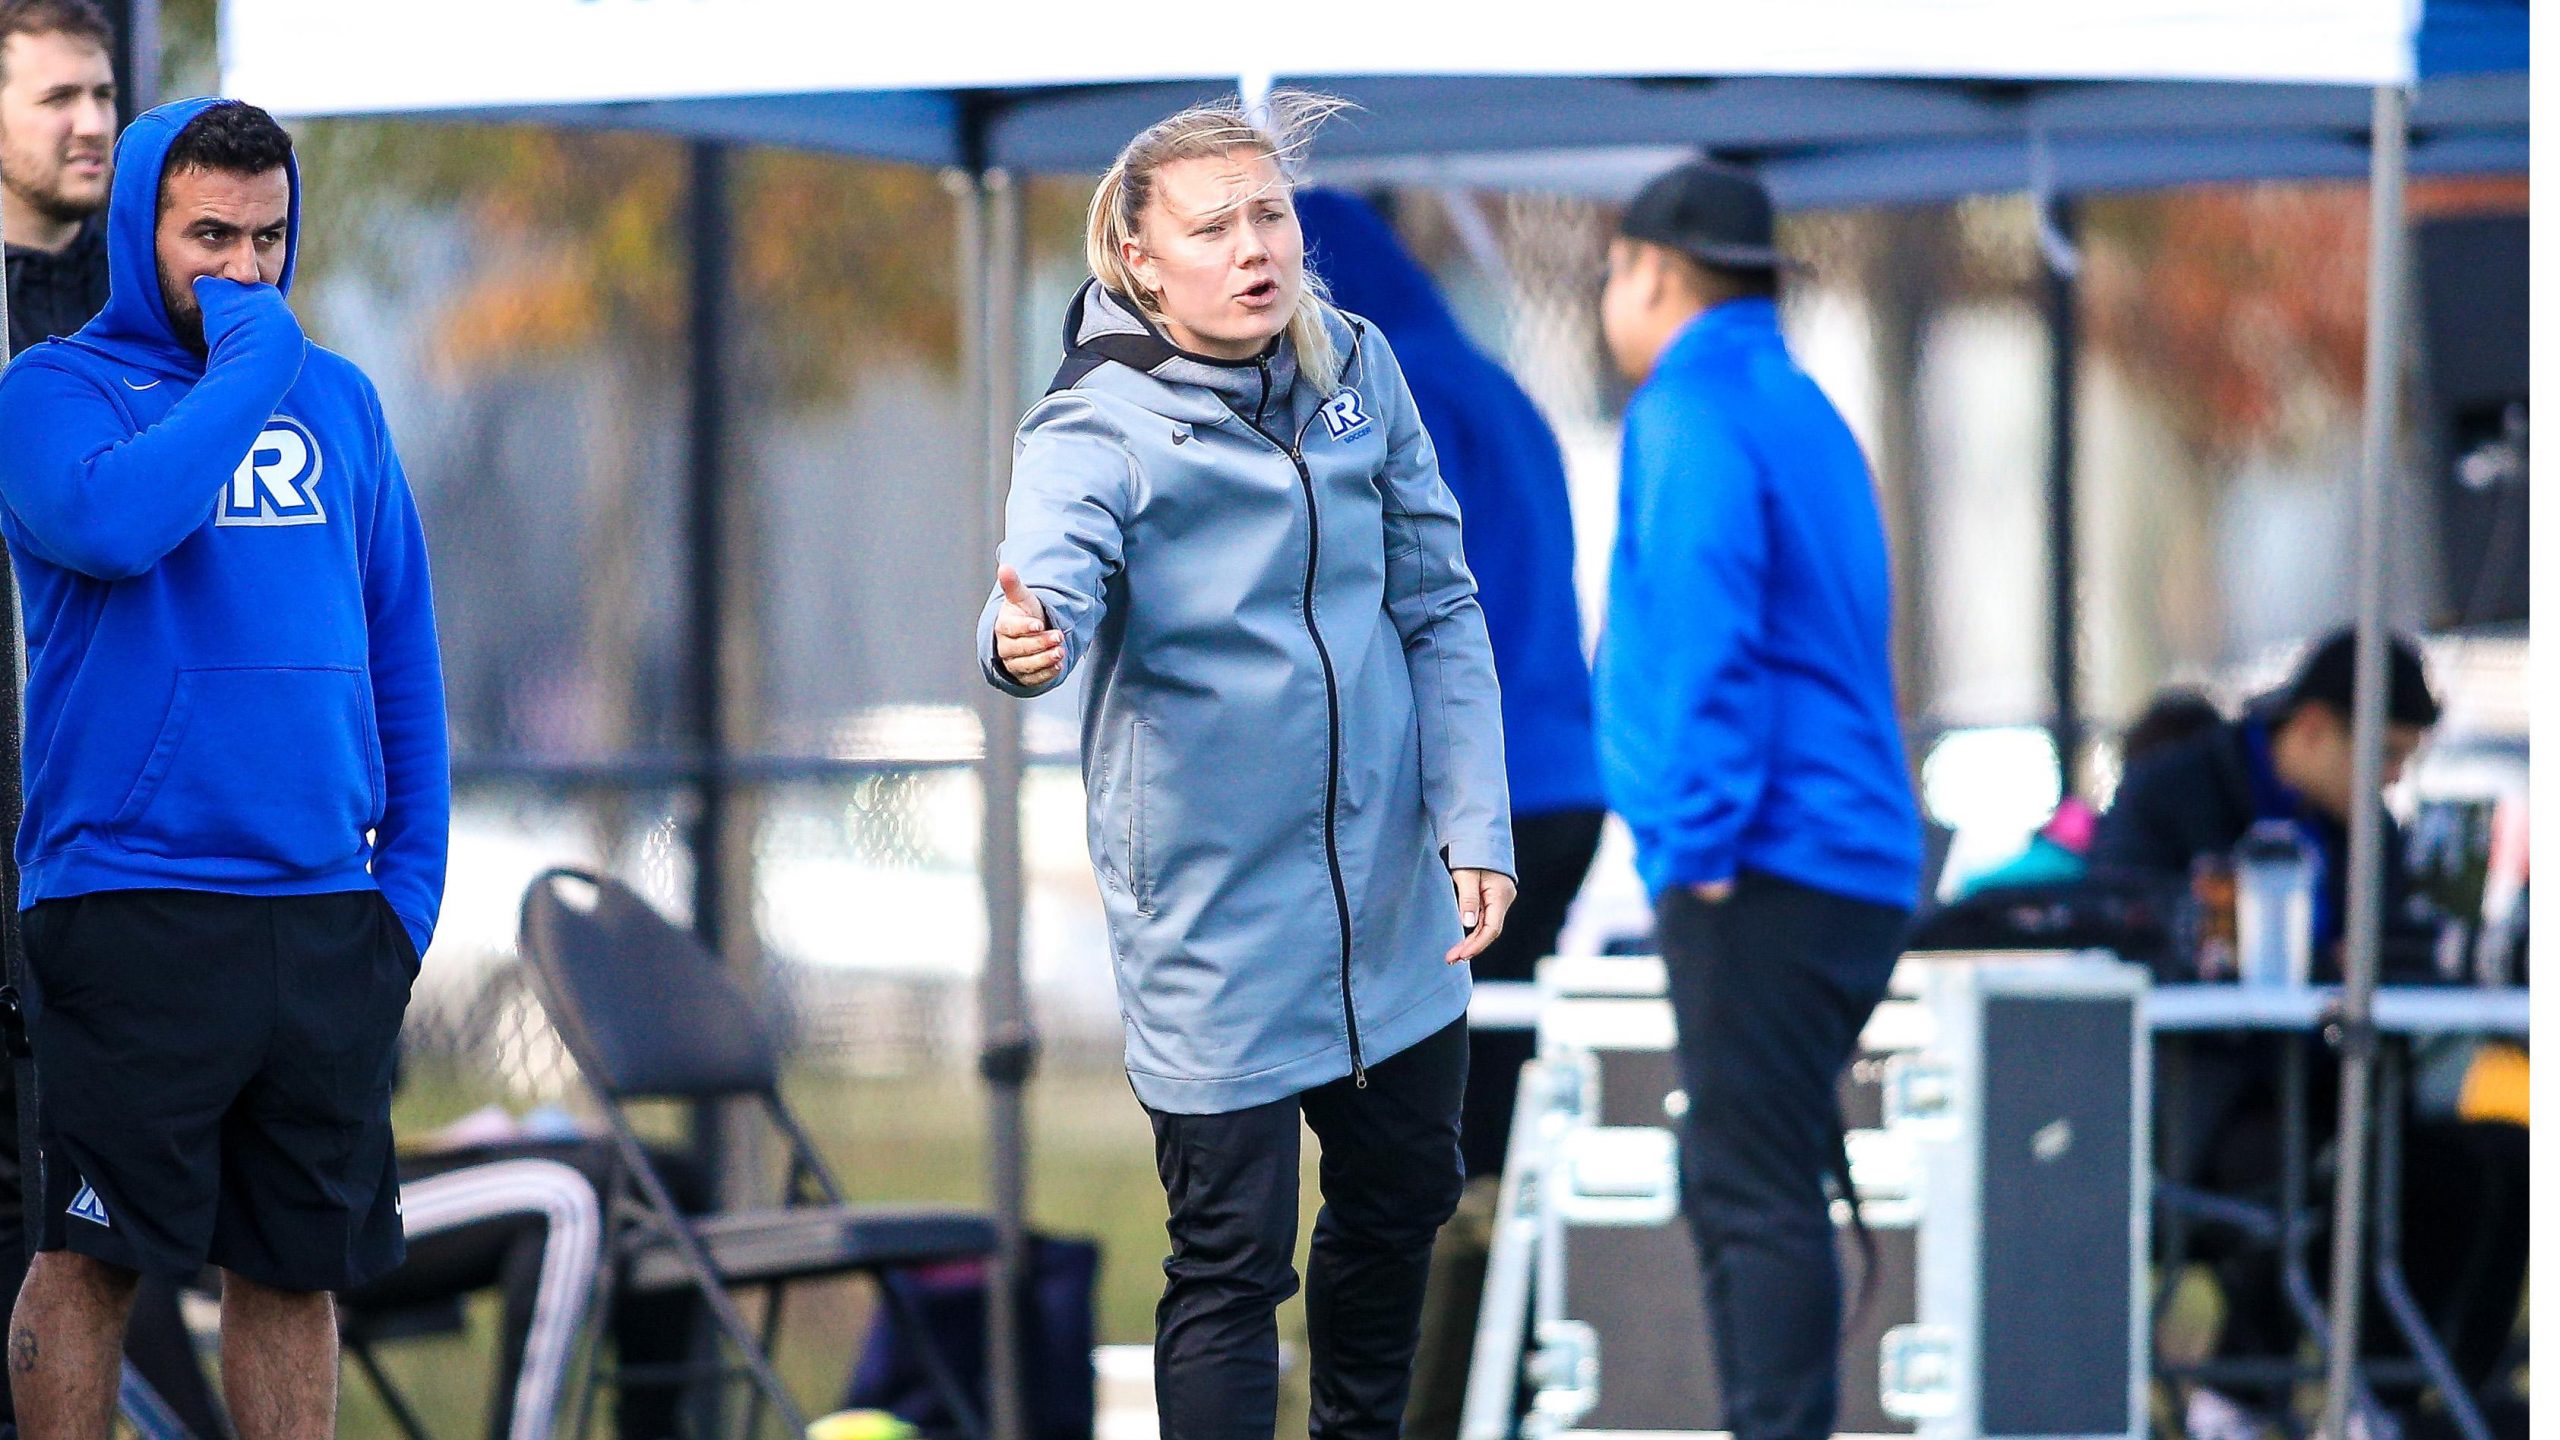 A woman in a grey jacket points to the field with a frustrated expression on her face